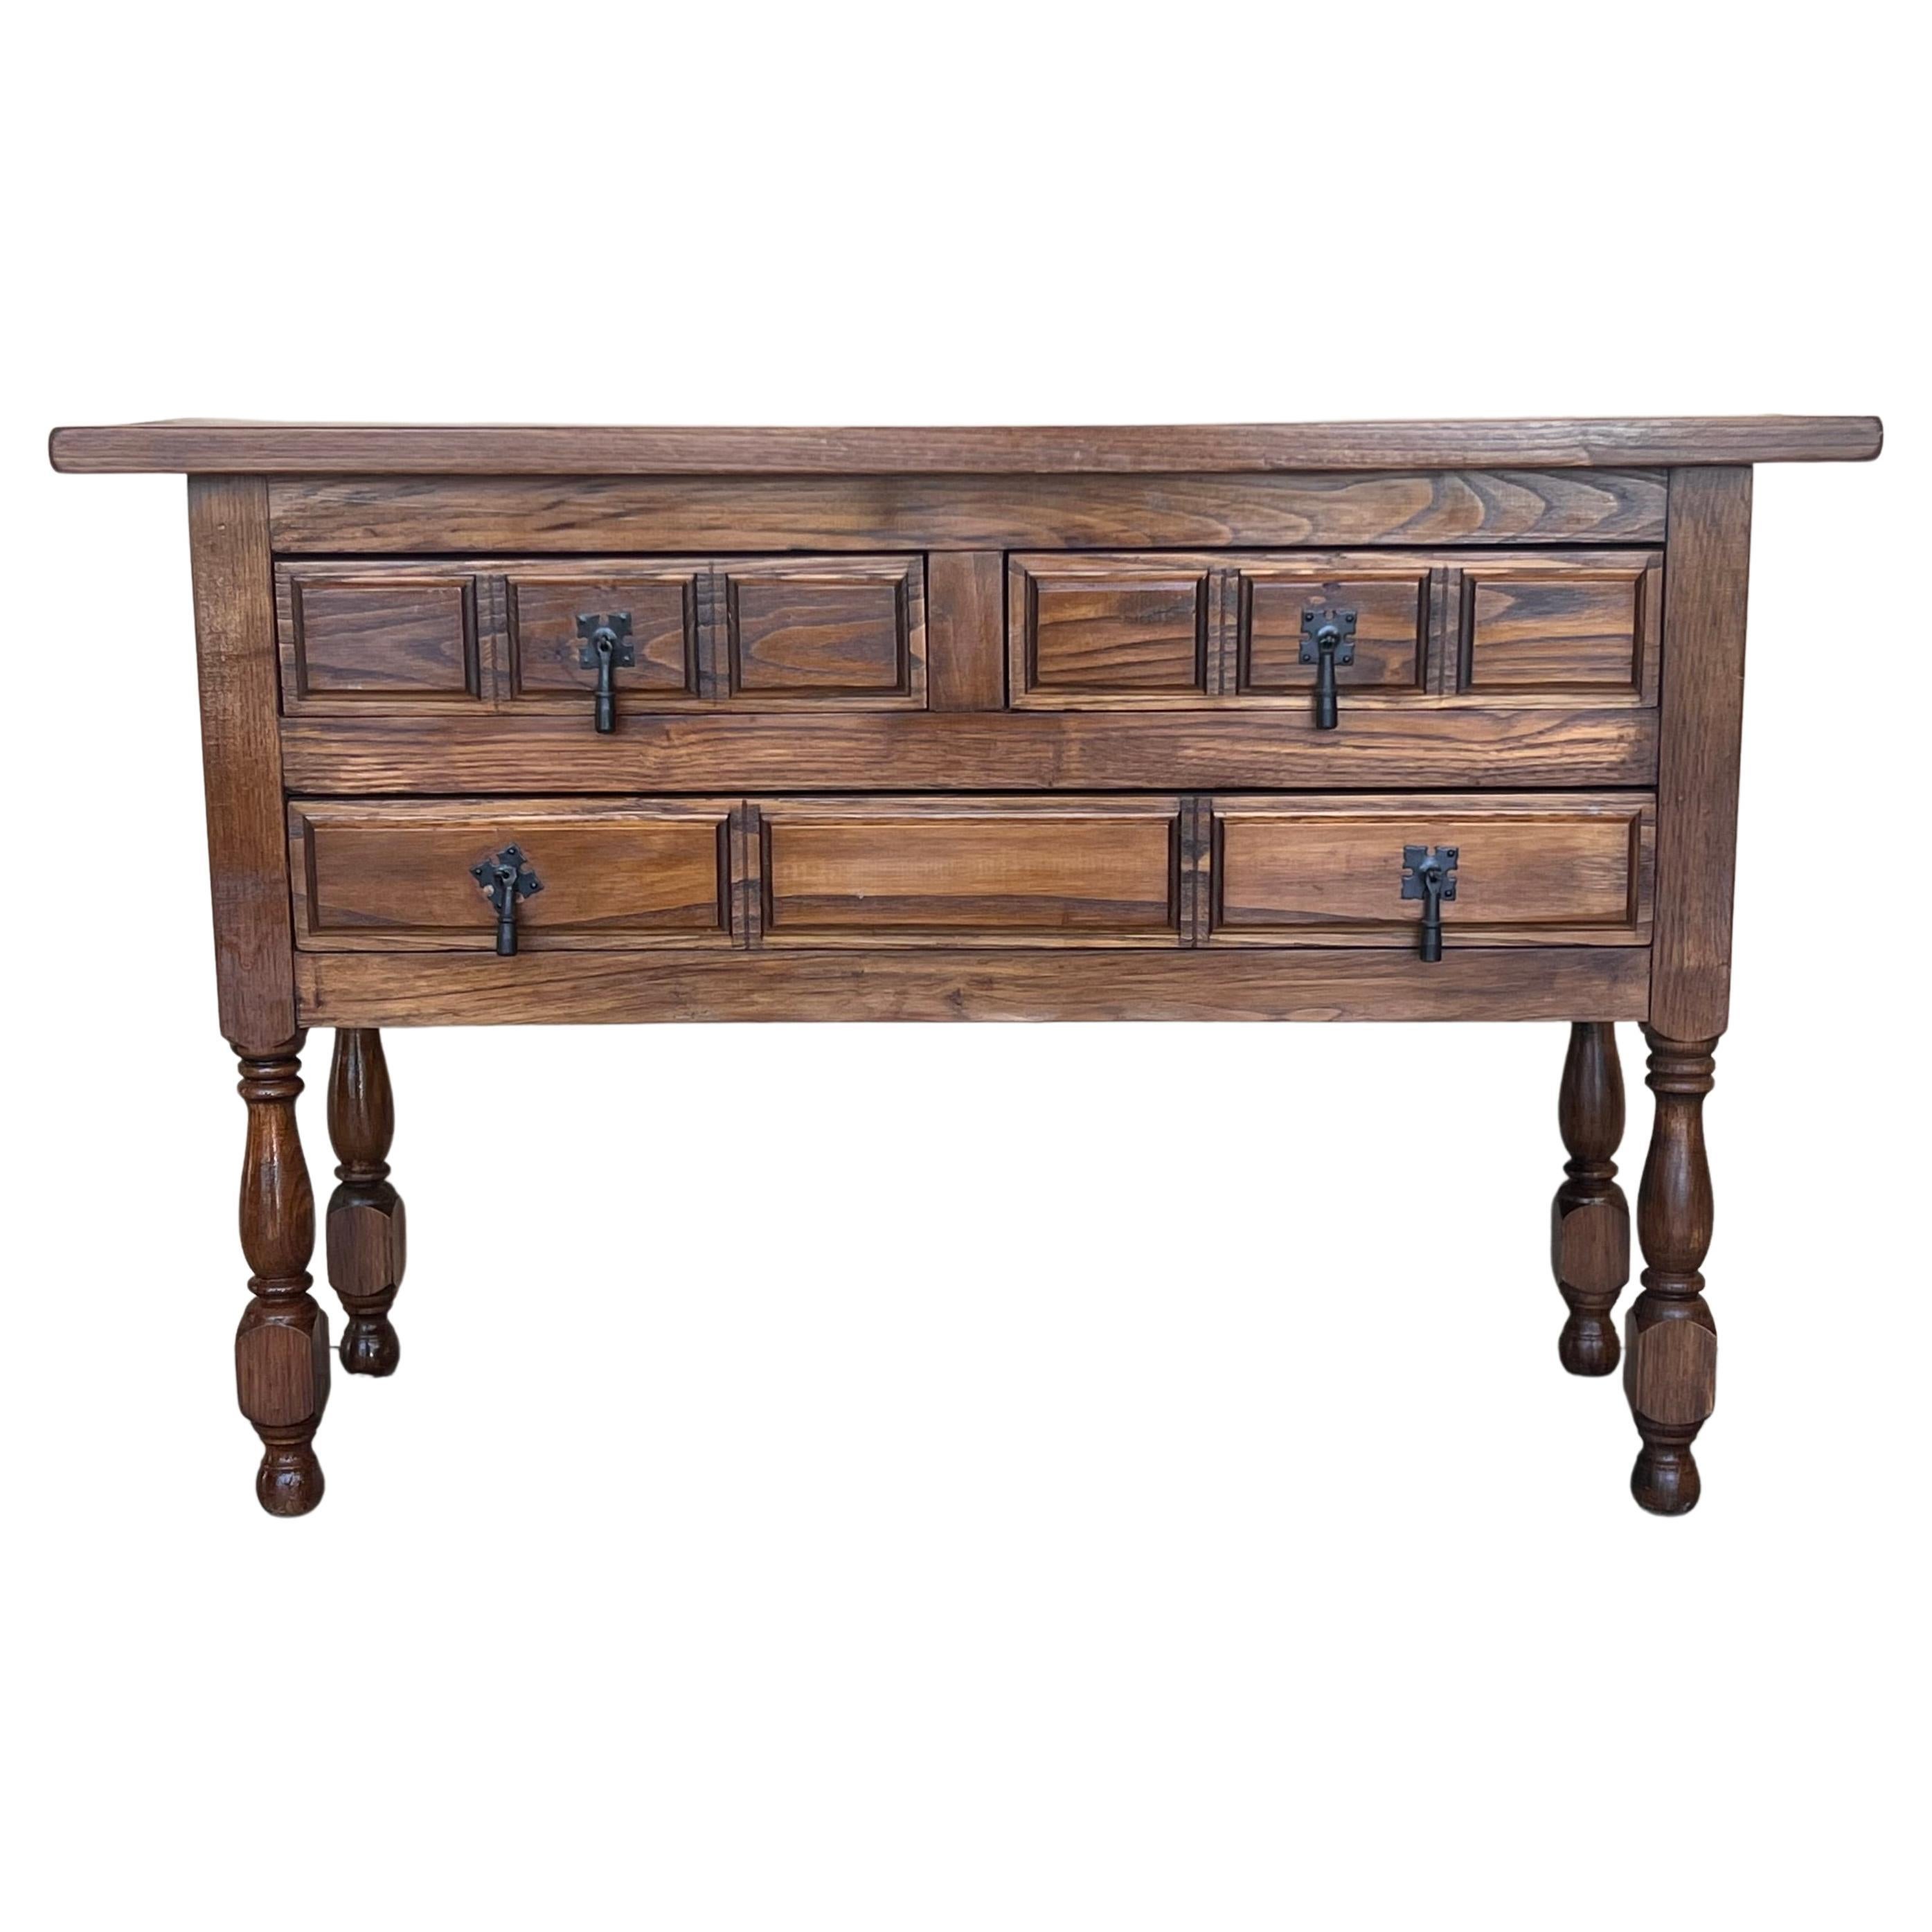 19th Century Catalan Spanish Carved Walnut Console Sofa Table, Four Drawers For Sale